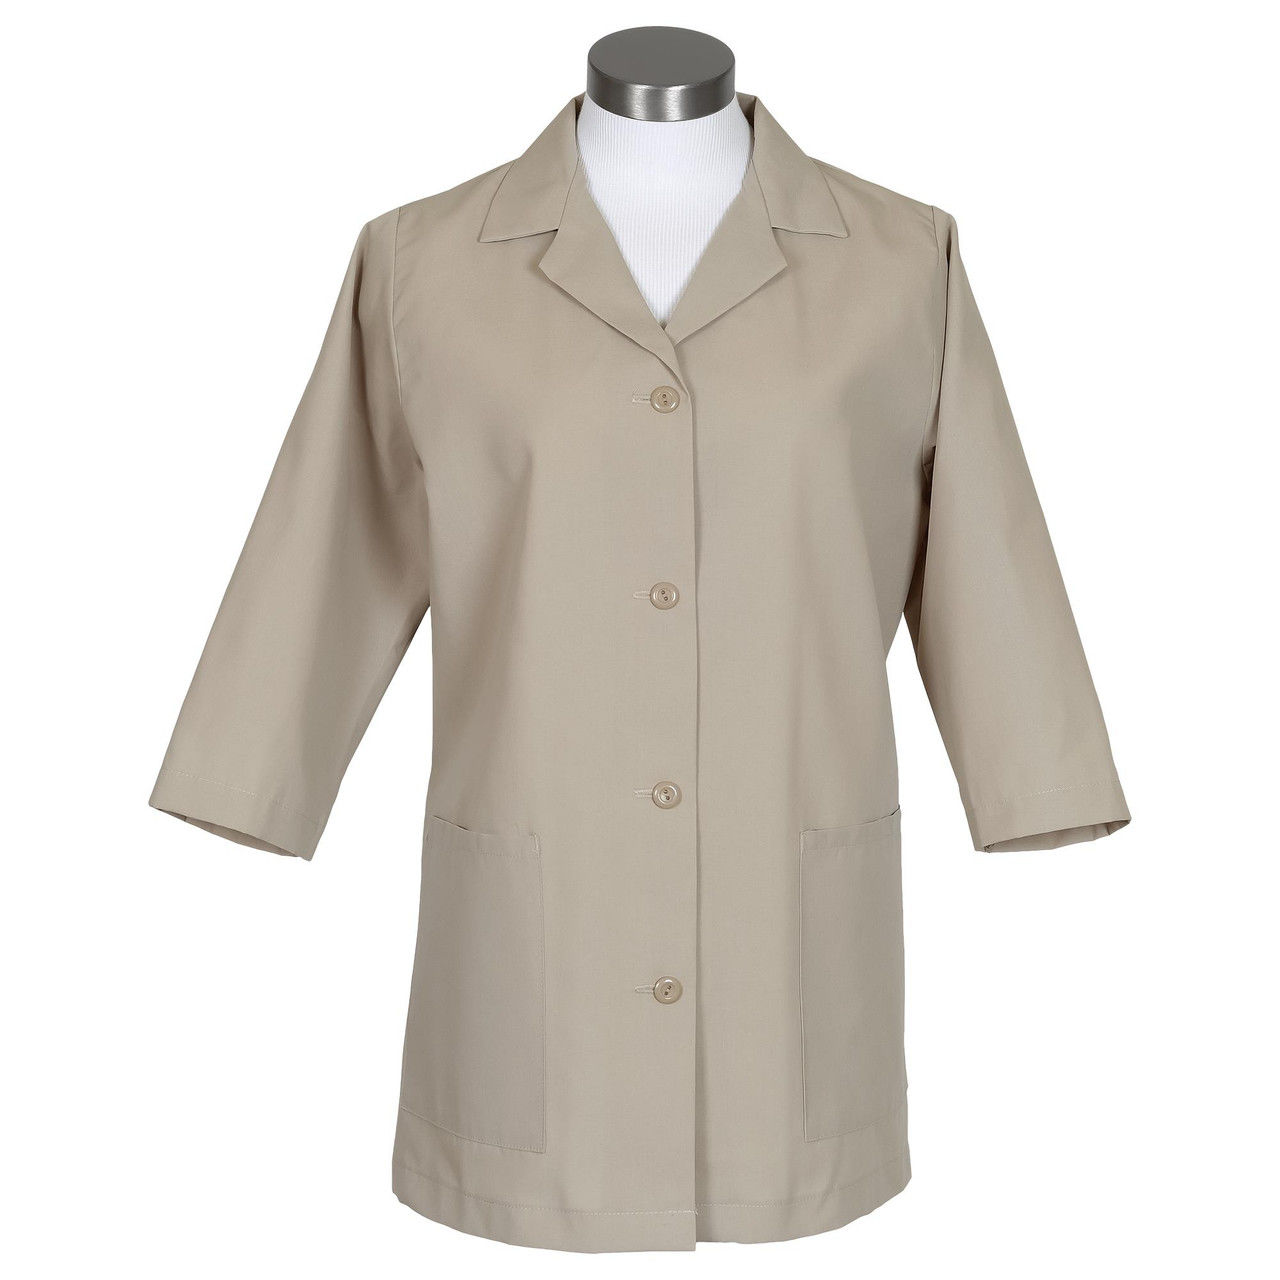 Female Smock, Tan, Fame 72 Questions & Answers